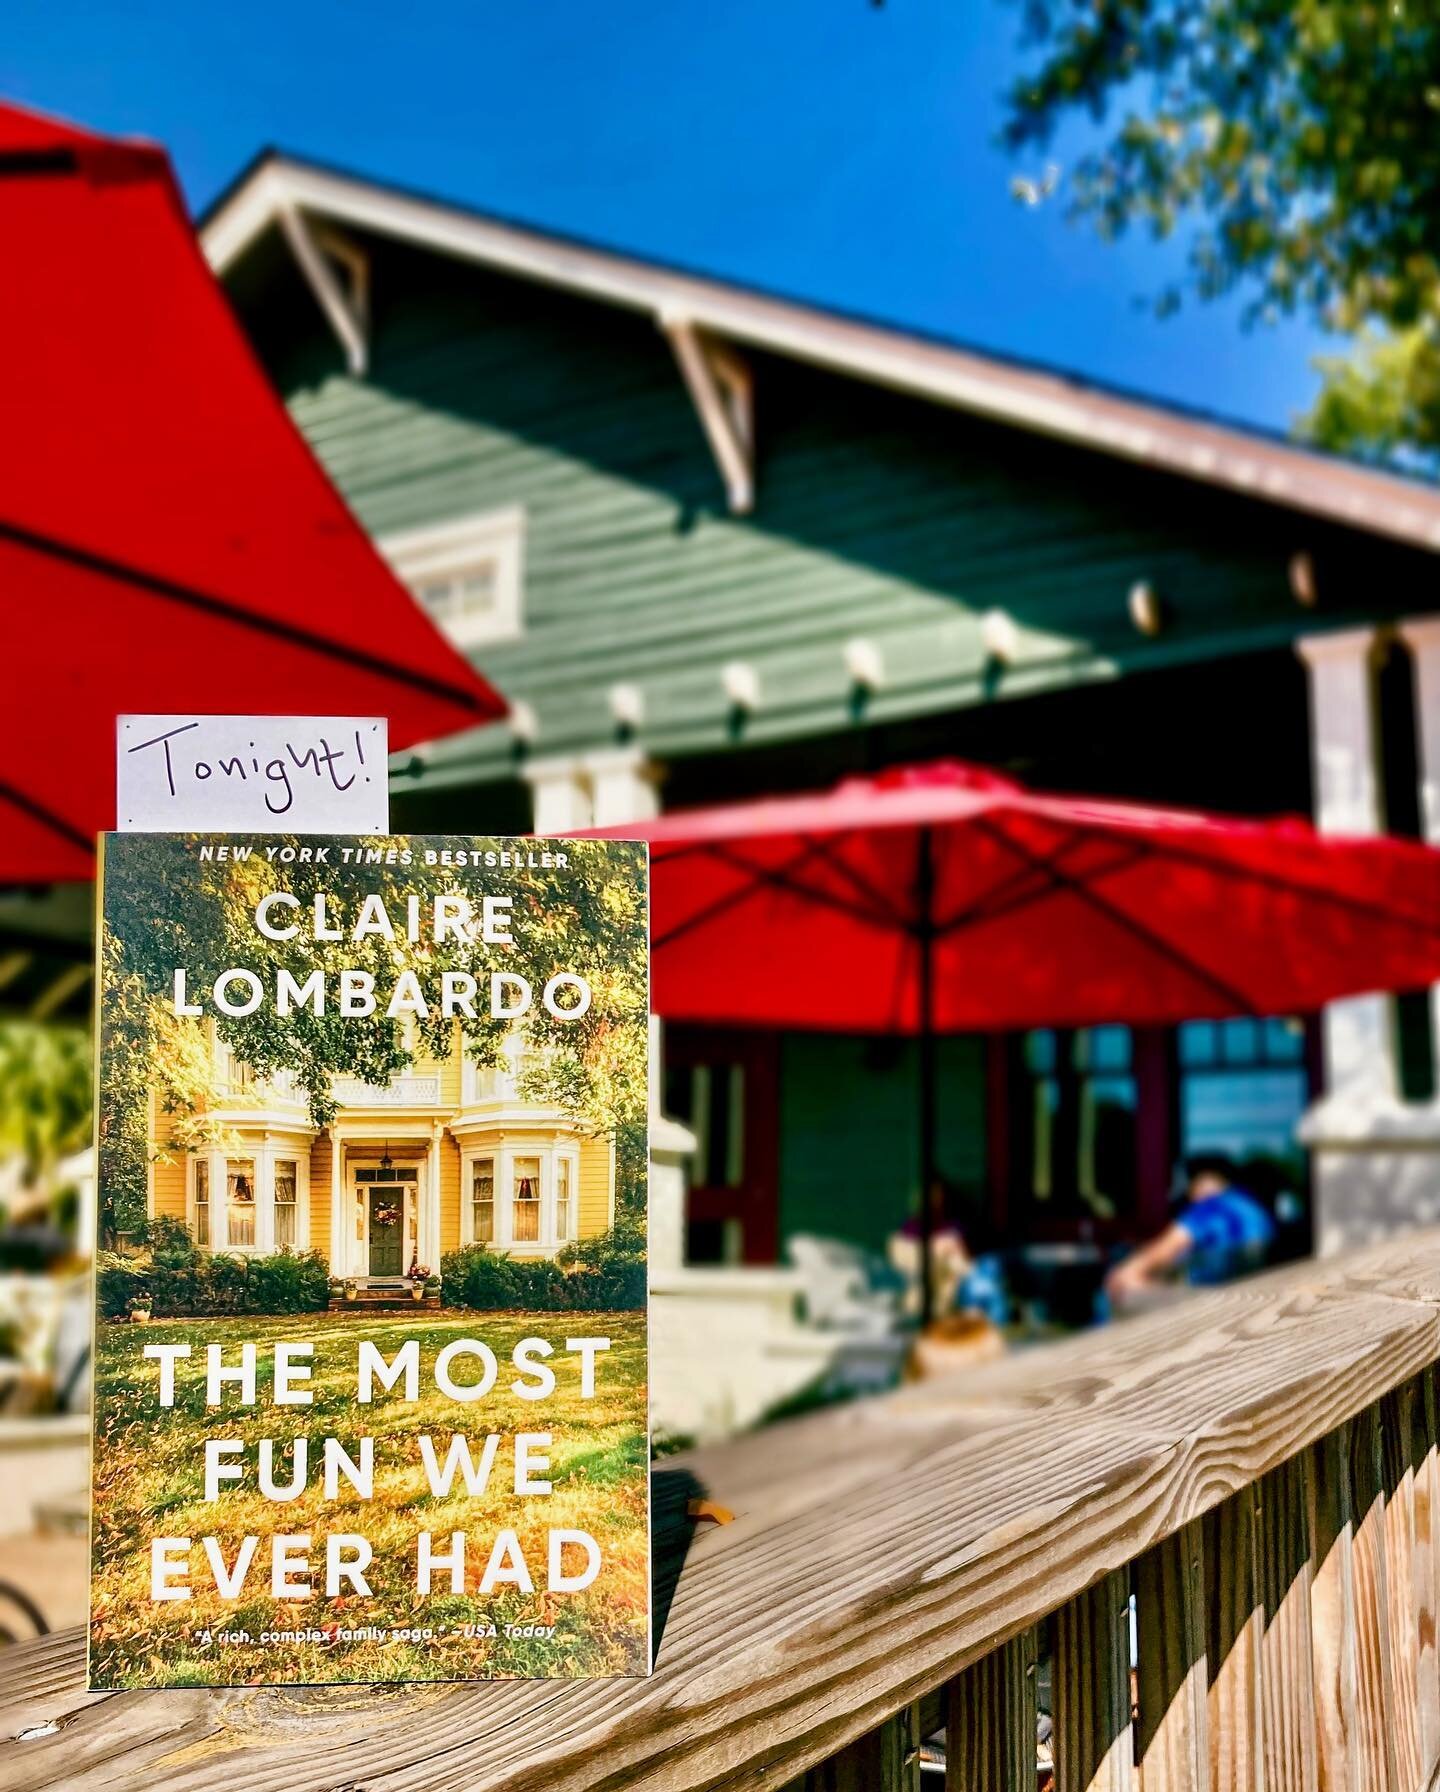 ✨TONIGHT✨ Make a night of it and swing by Well Red at 6:30pm, when we&rsquo;ll be welcoming @nytimes bestselling author @claire_lombardo! She&rsquo;ll be answering questions and reading excerpts from her book, &ldquo;The Most Fun We Ever Had,&rdquo; 